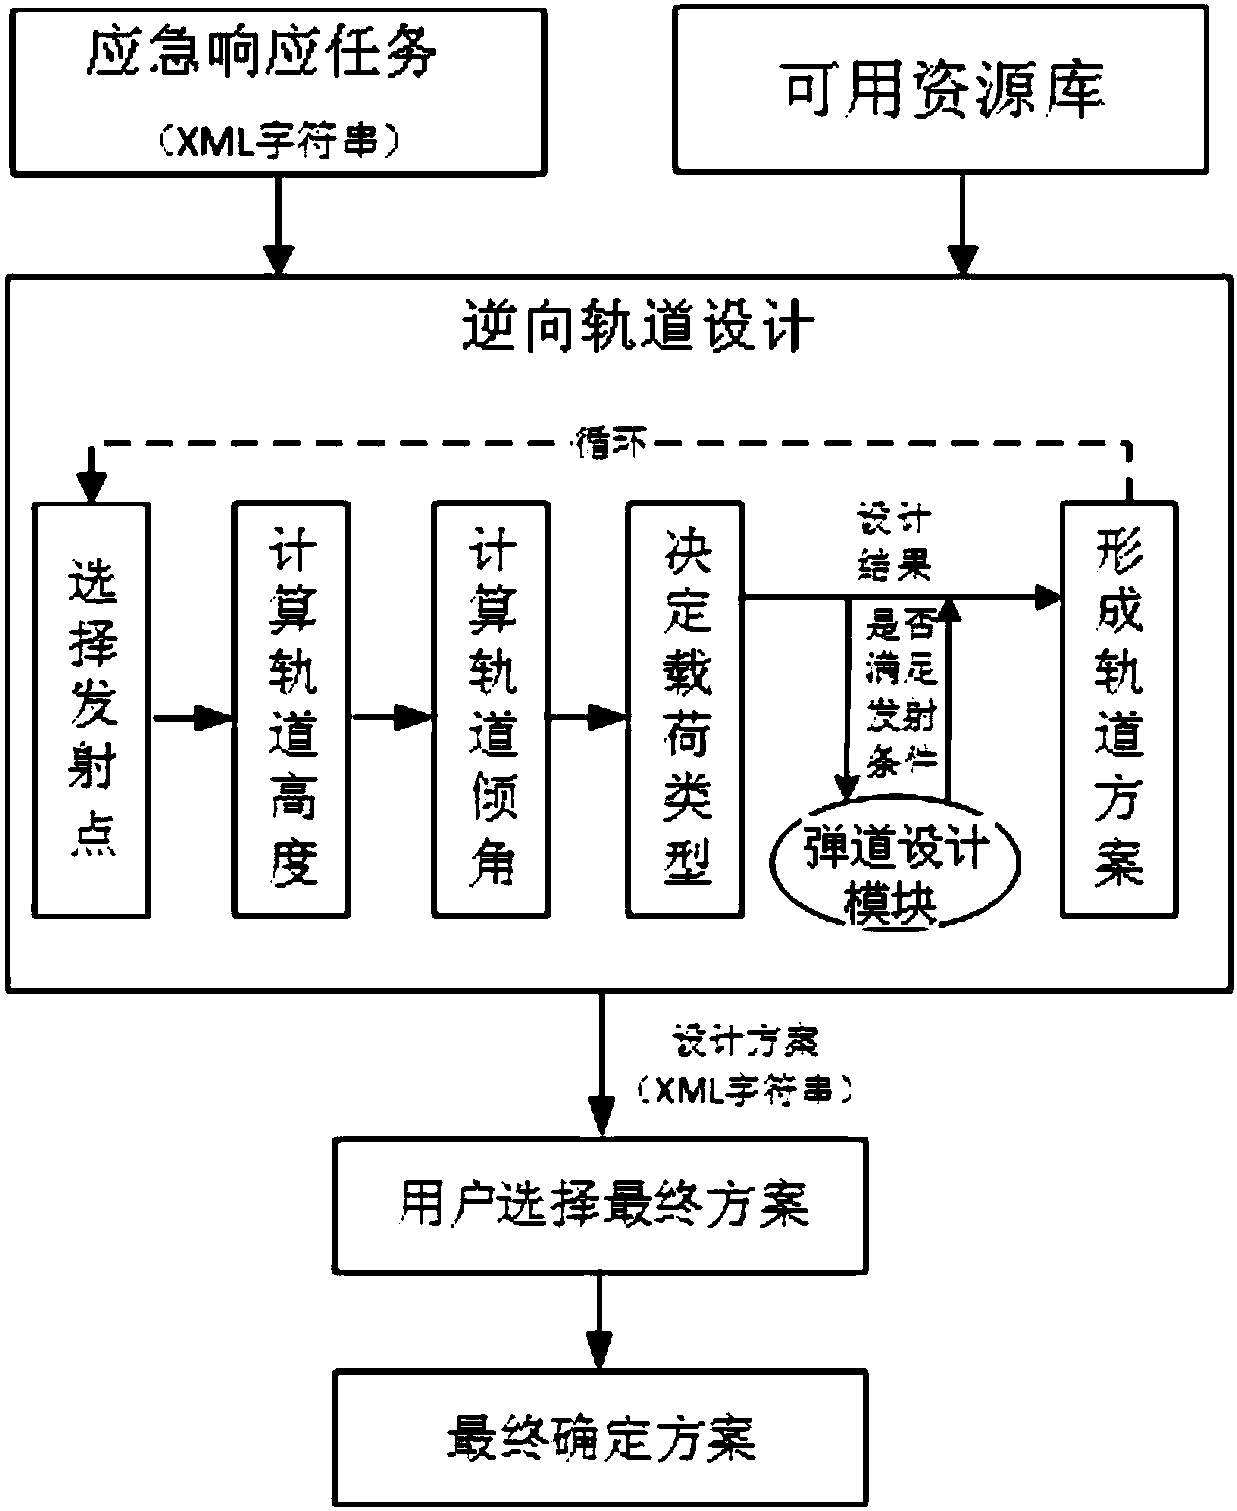 Launching task design system used for emergency application, and method thereof